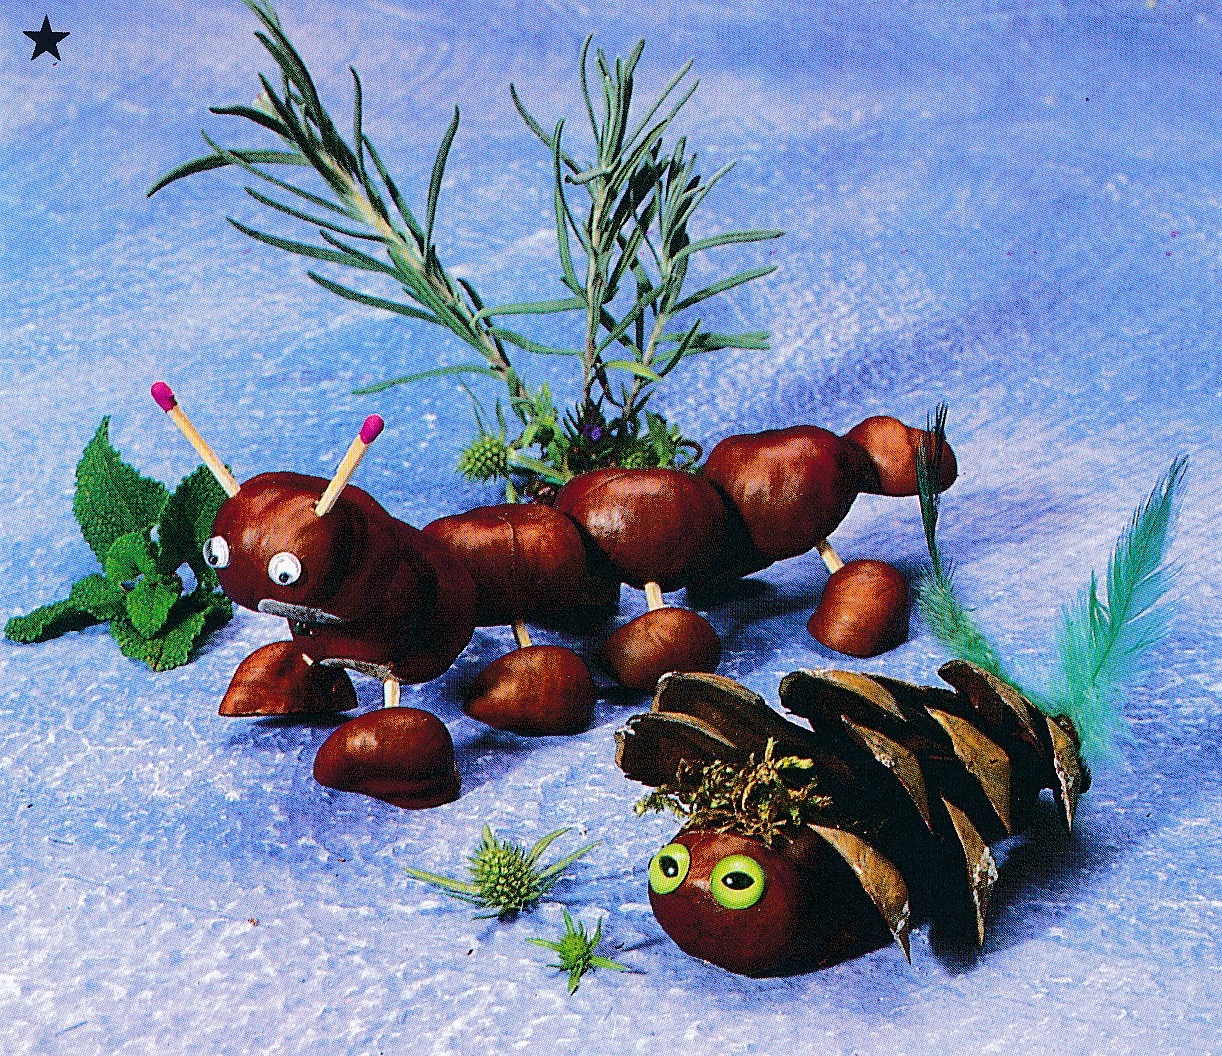 animals made of conkers